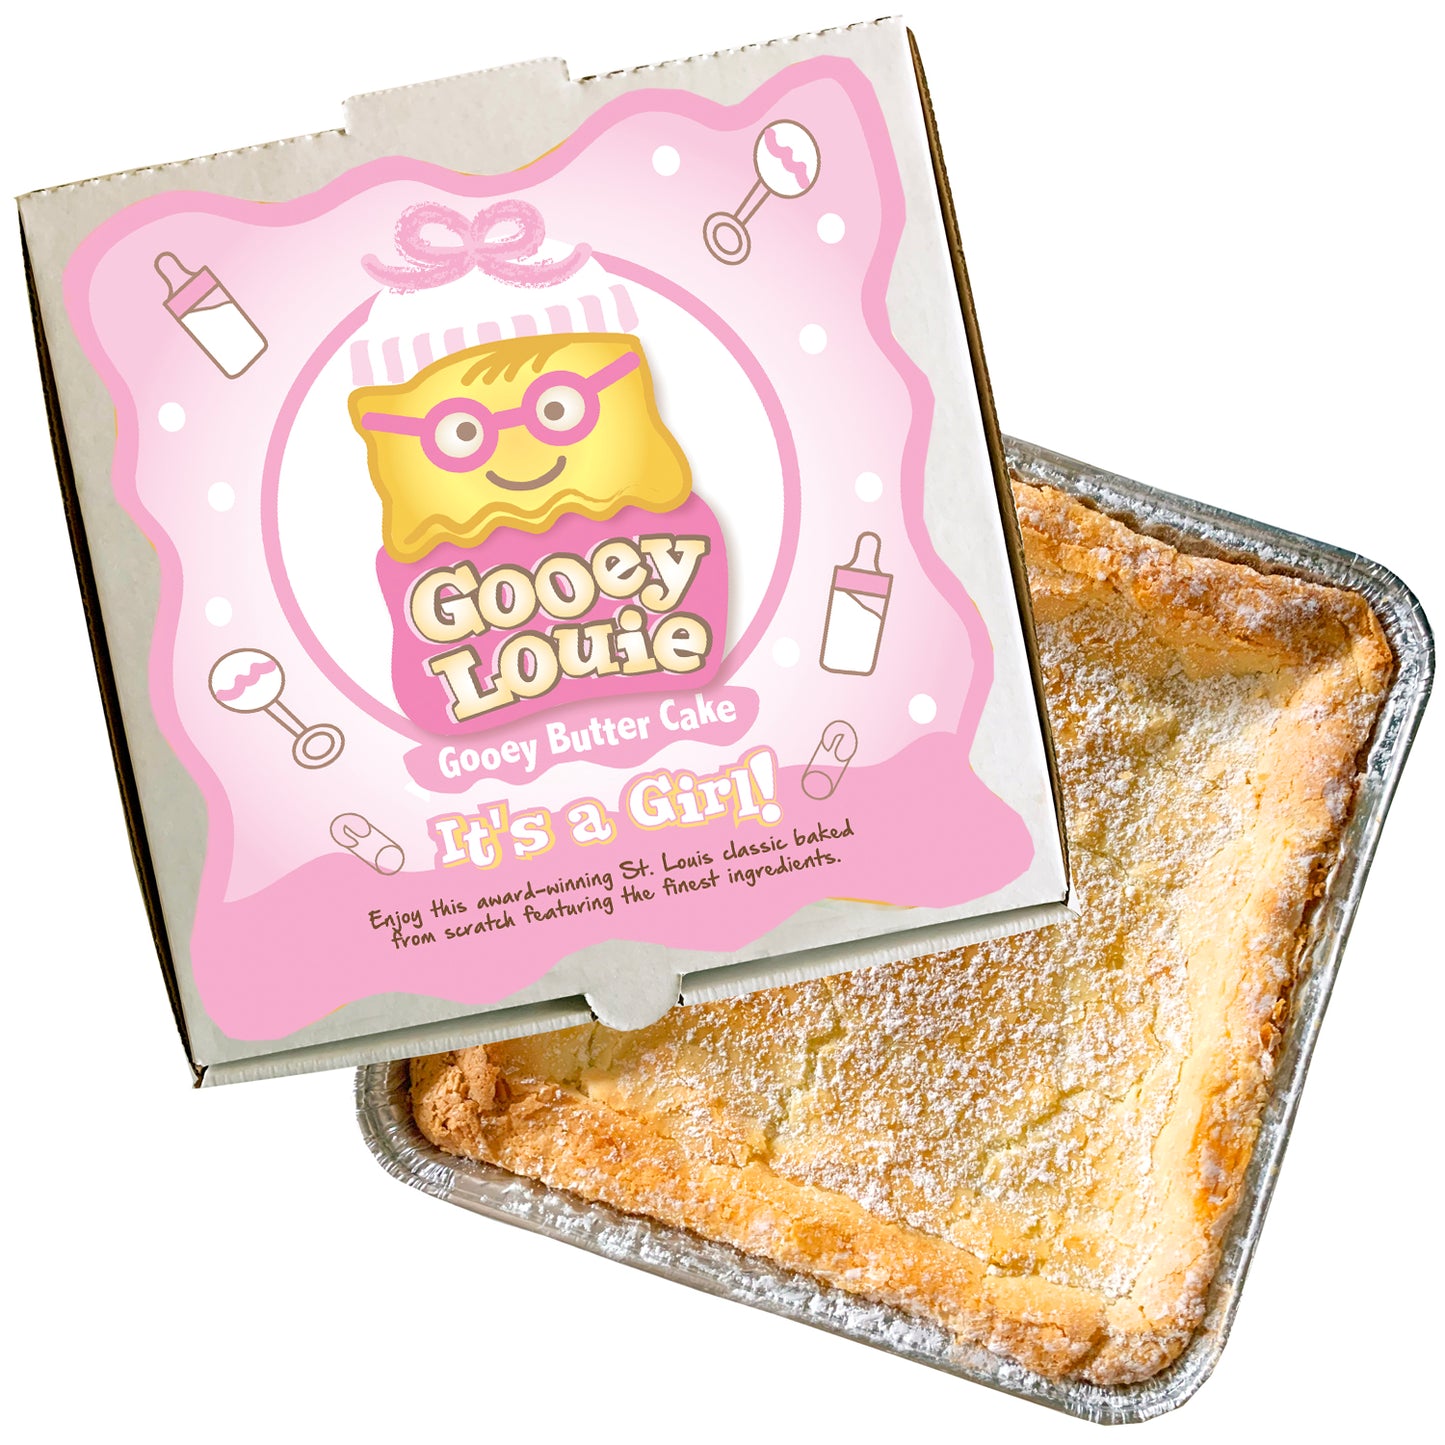 IT'S A GIRL! Gooey Louie Gift Box– Gooey Butter Cake LOCAL PICKUP